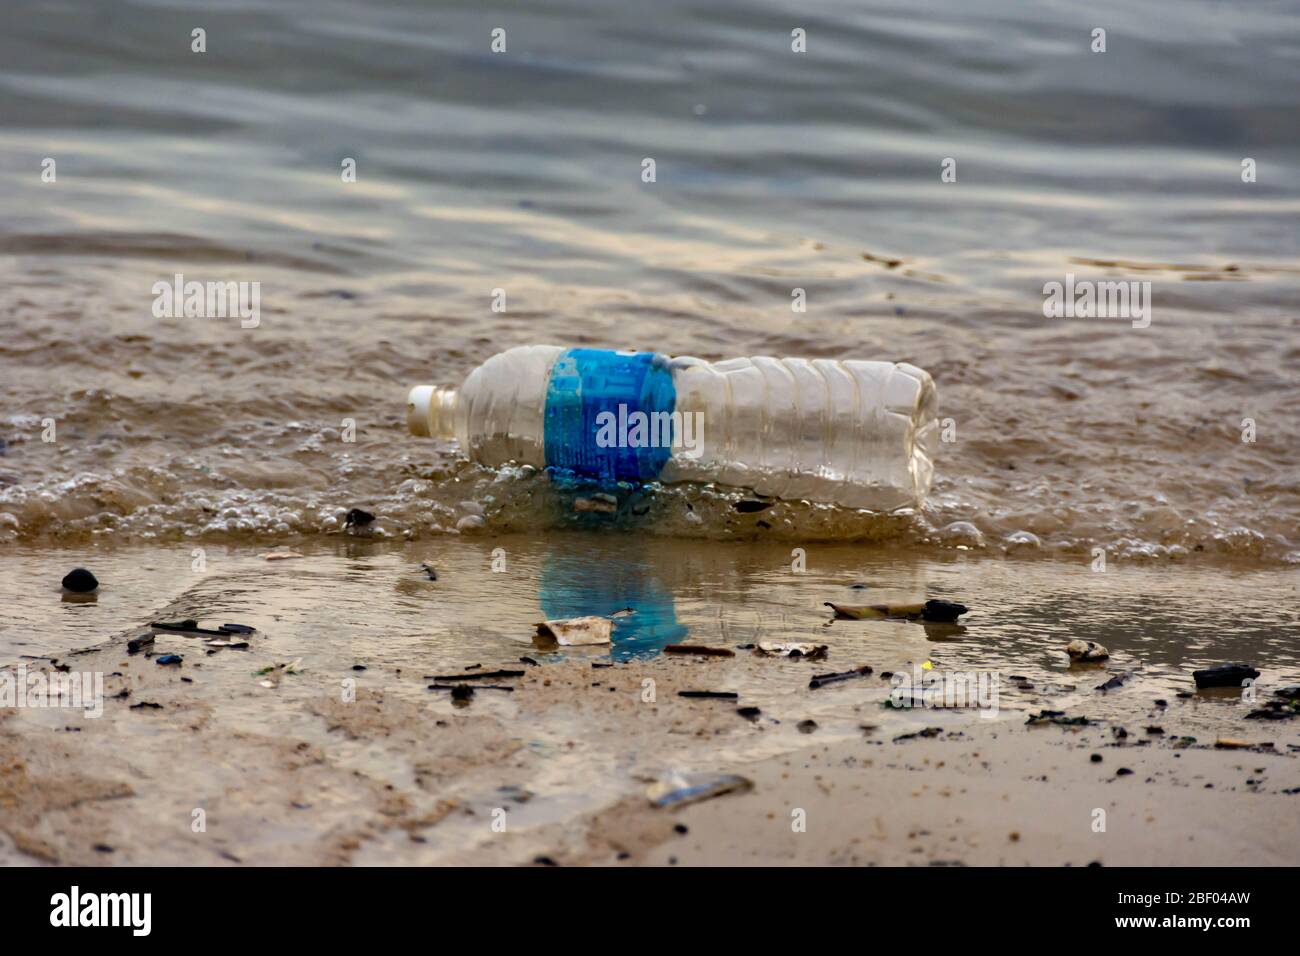 https://c8.alamy.com/comp/2BF04AW/plastic-water-bottle-trash-on-a-bay-polluting-the-ocean-plastic-trash-being-thrown-from-the-beach-2BF04AW.jpg